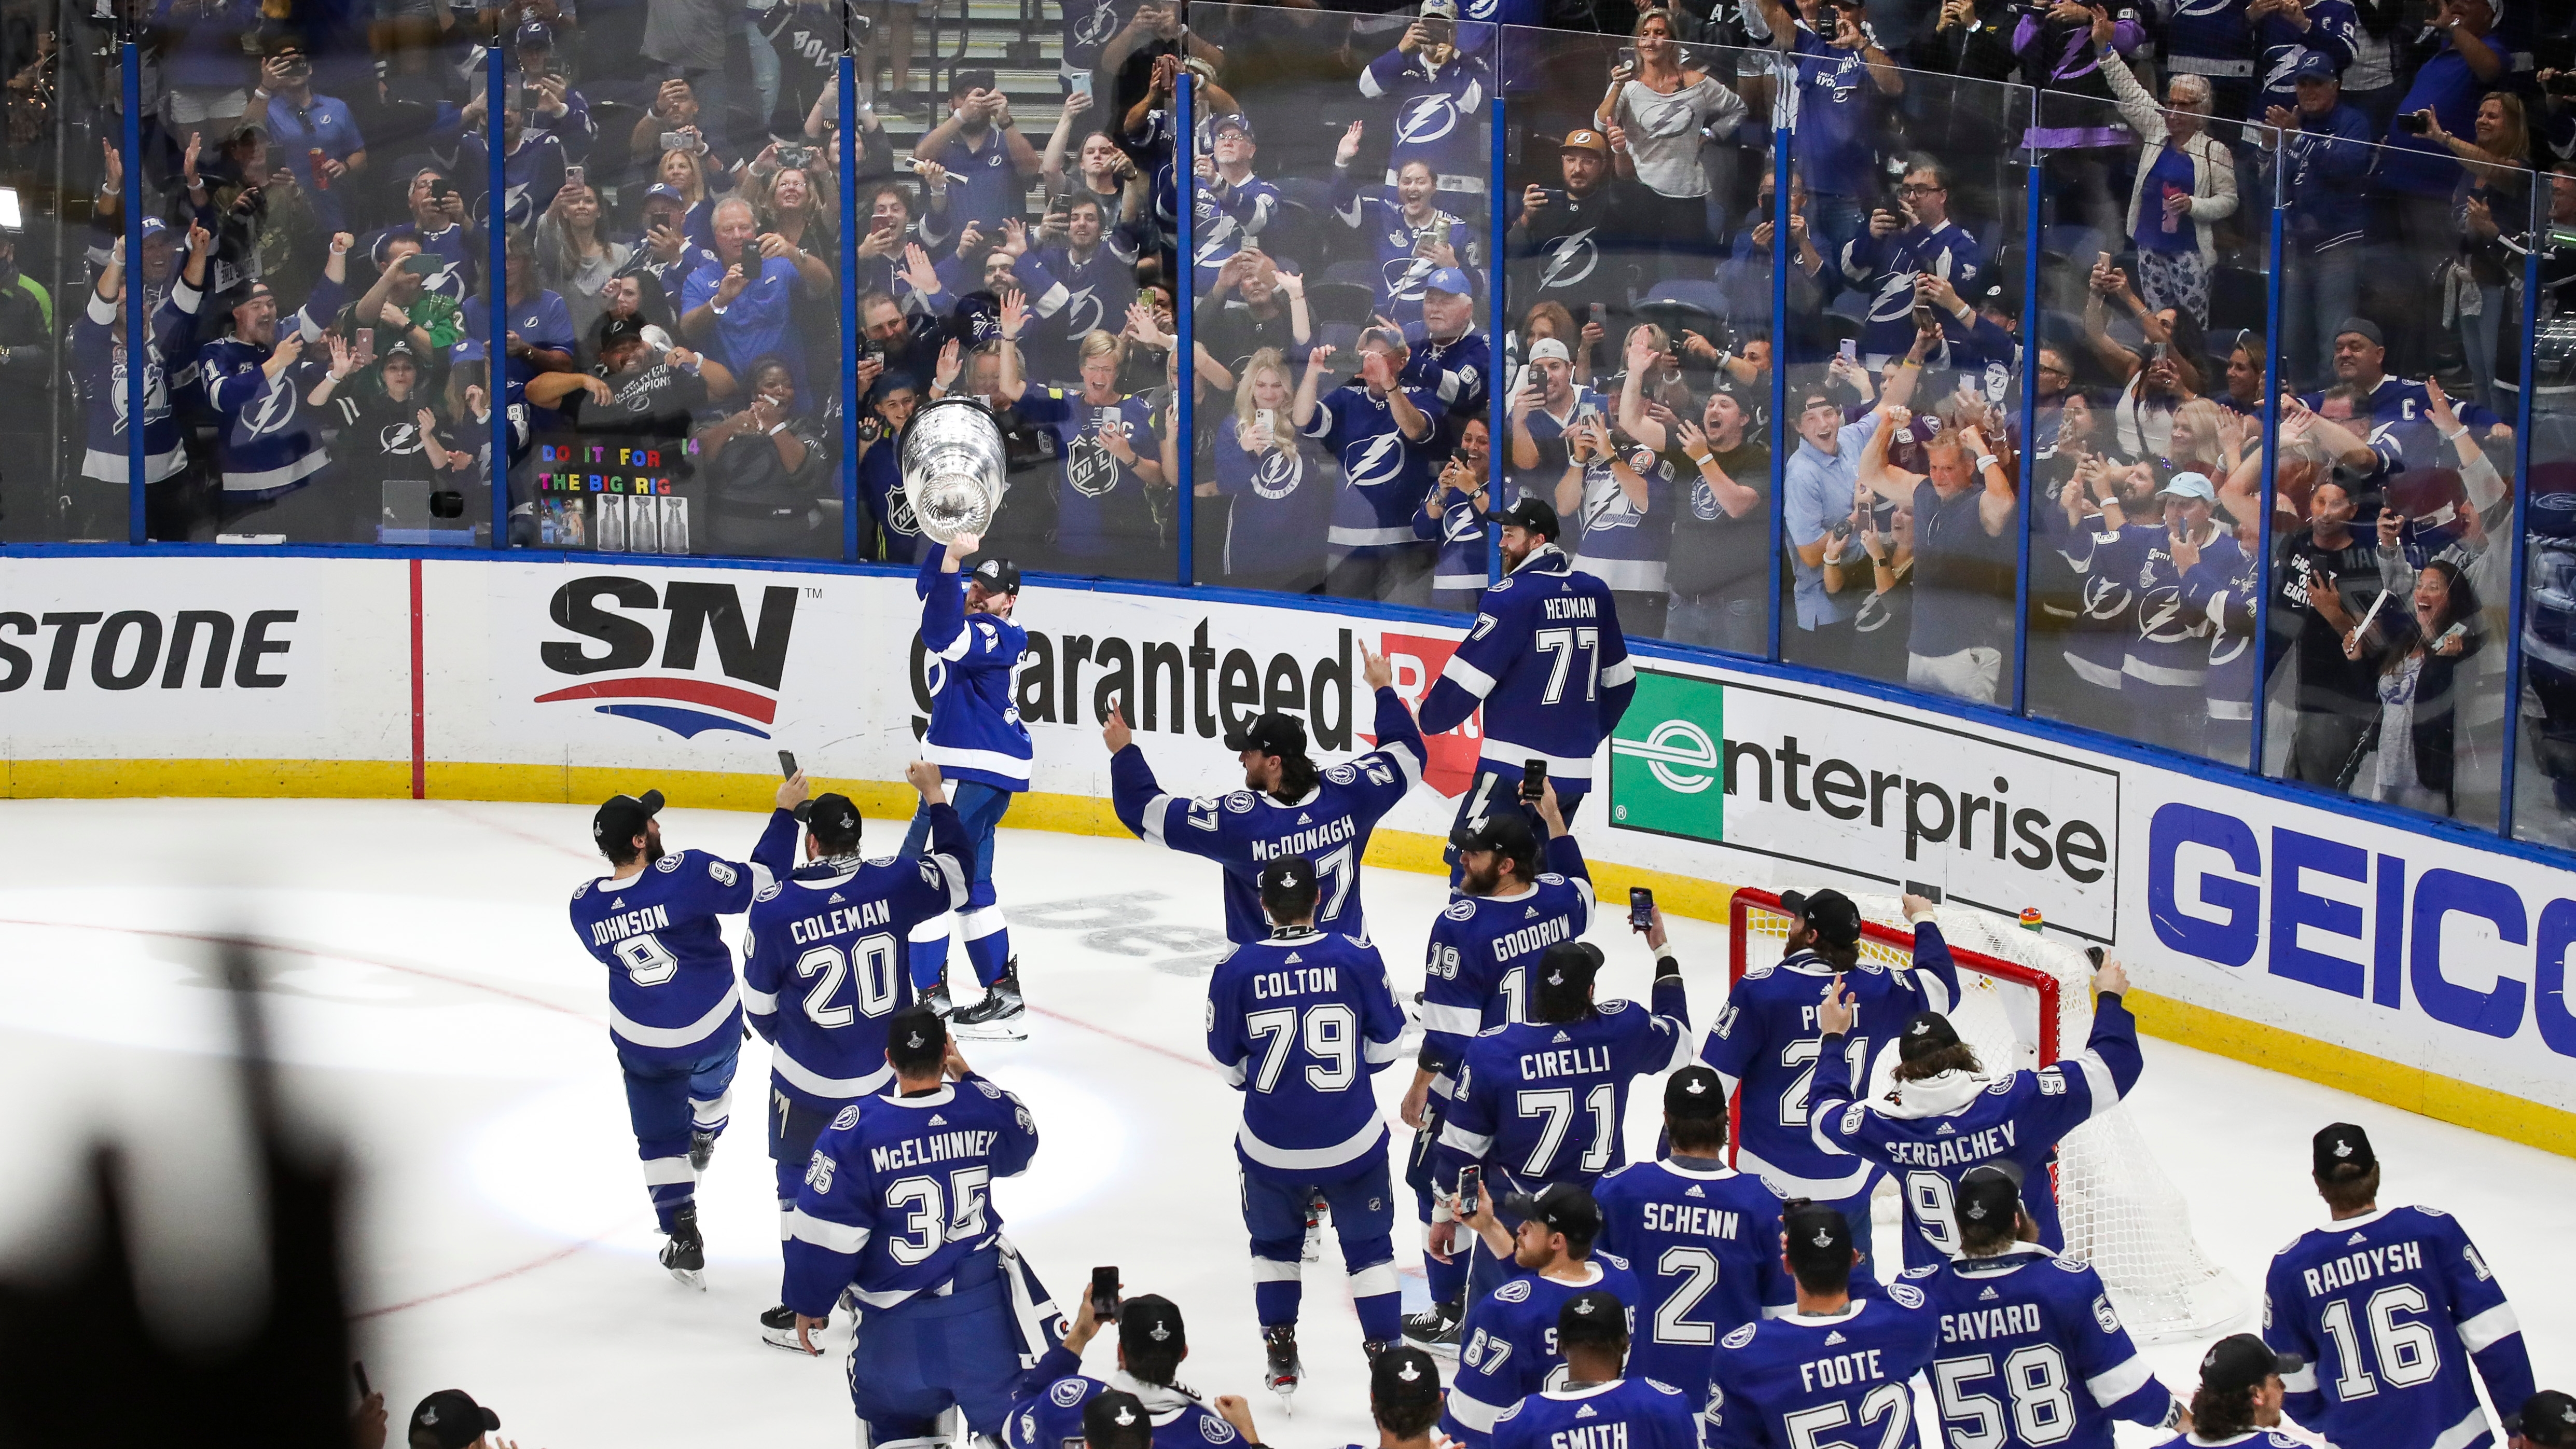 Comparing the historic Lightning to past Stanley Cup winners